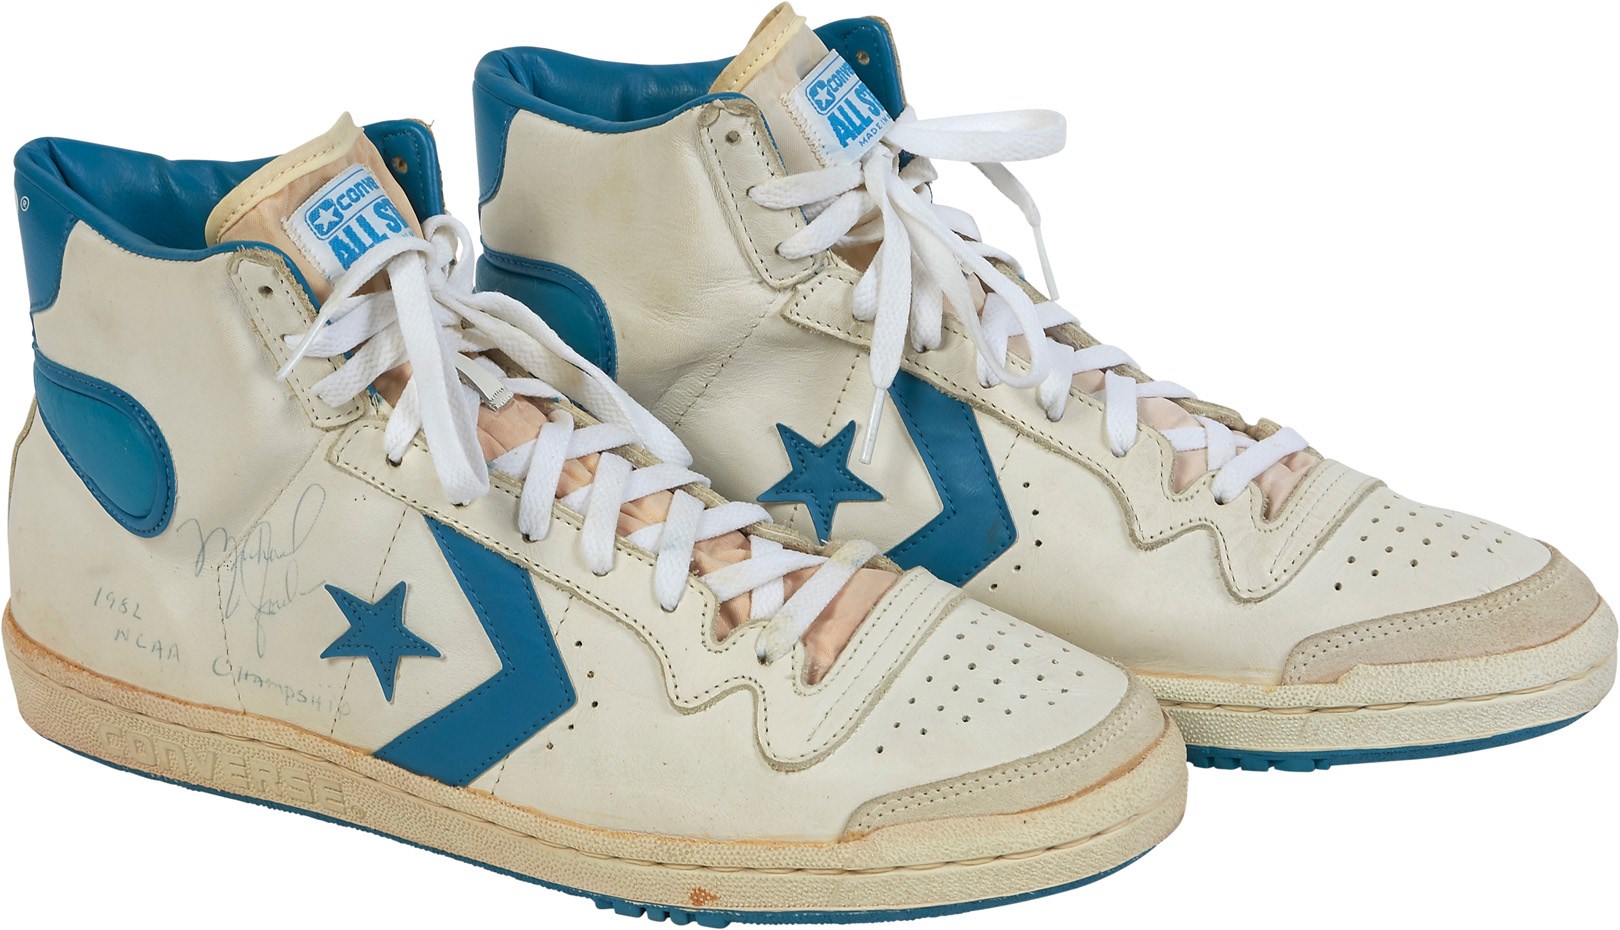 Michael Jordan's UNC Basketball Converse Sneakers Are Up For